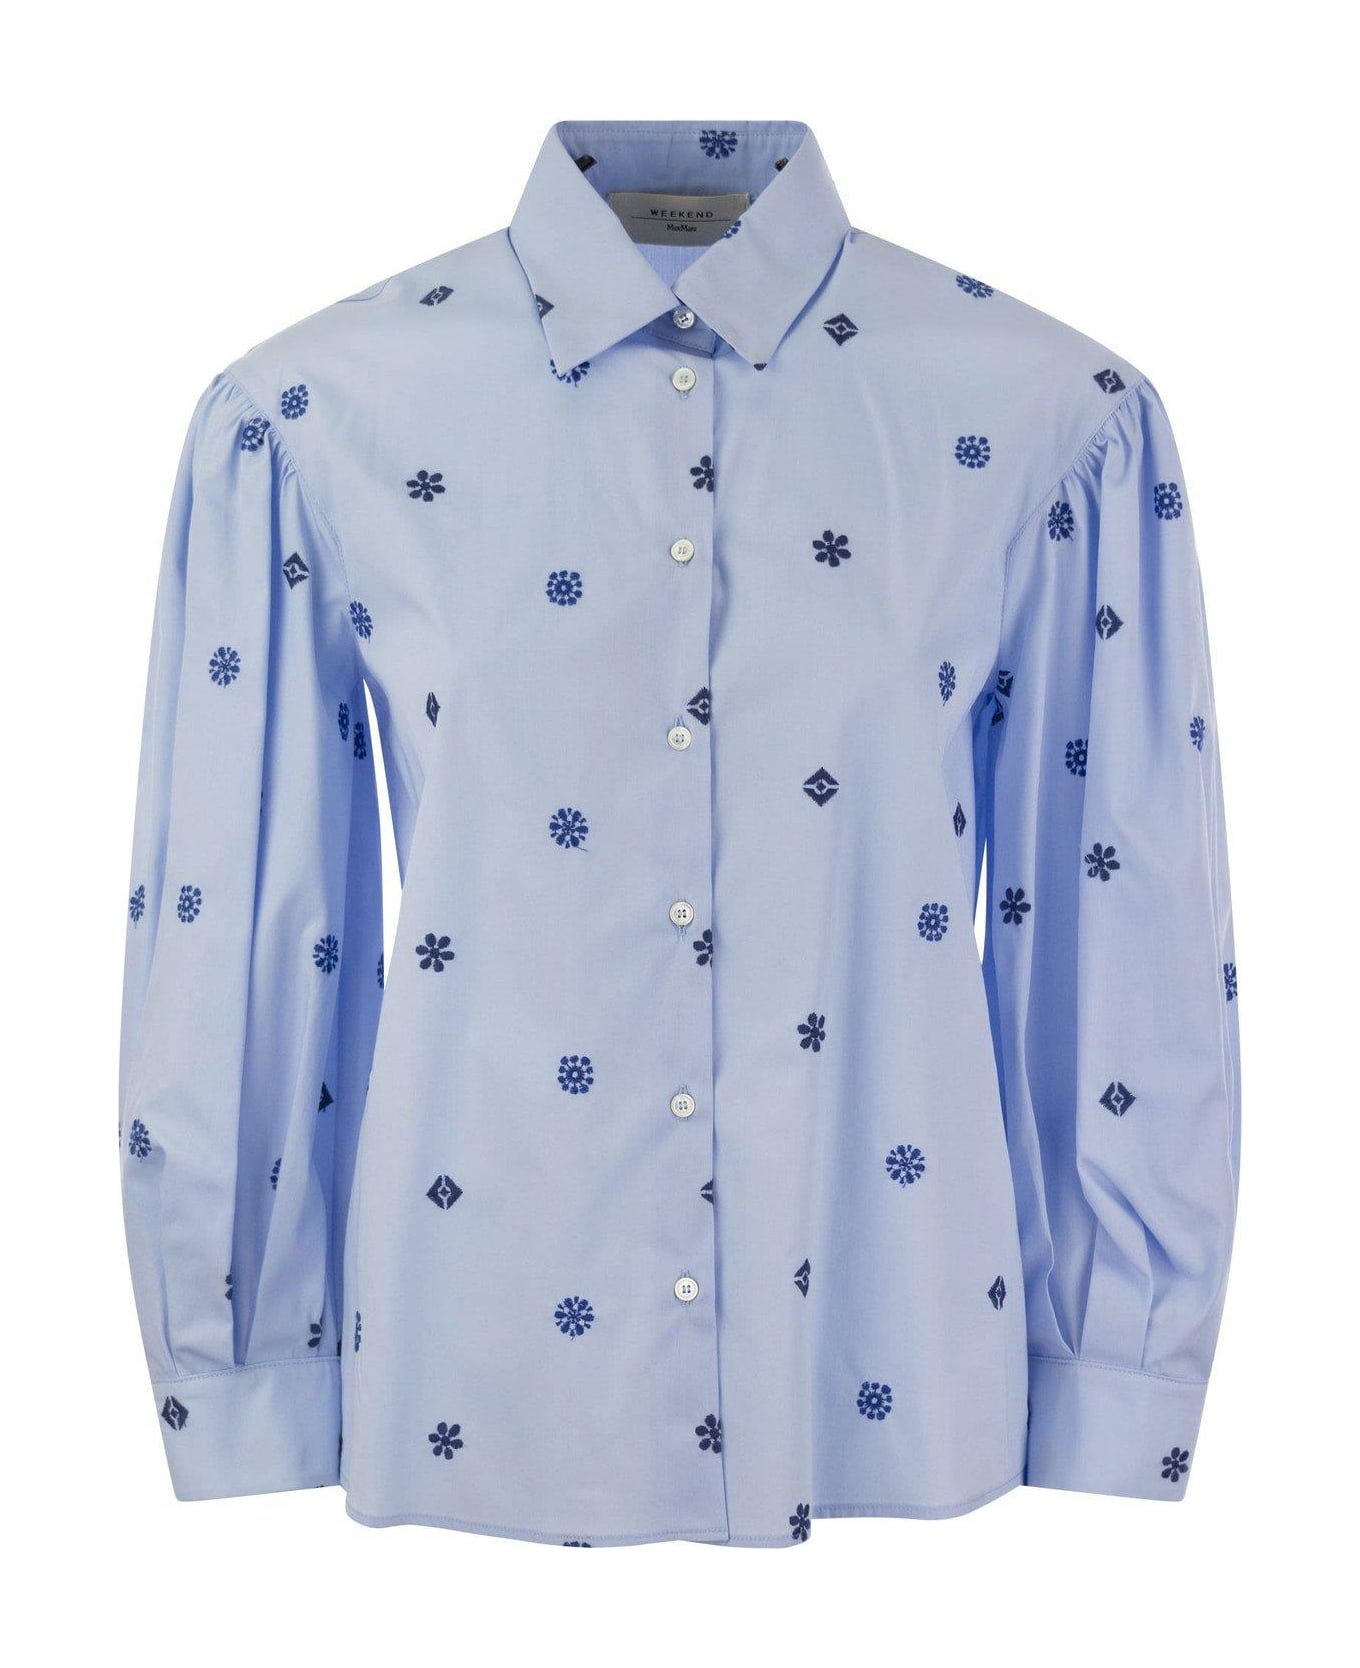 Weekend Max Mara All-over Patterned Long-sleeved Shirt - LIGHT BLUE